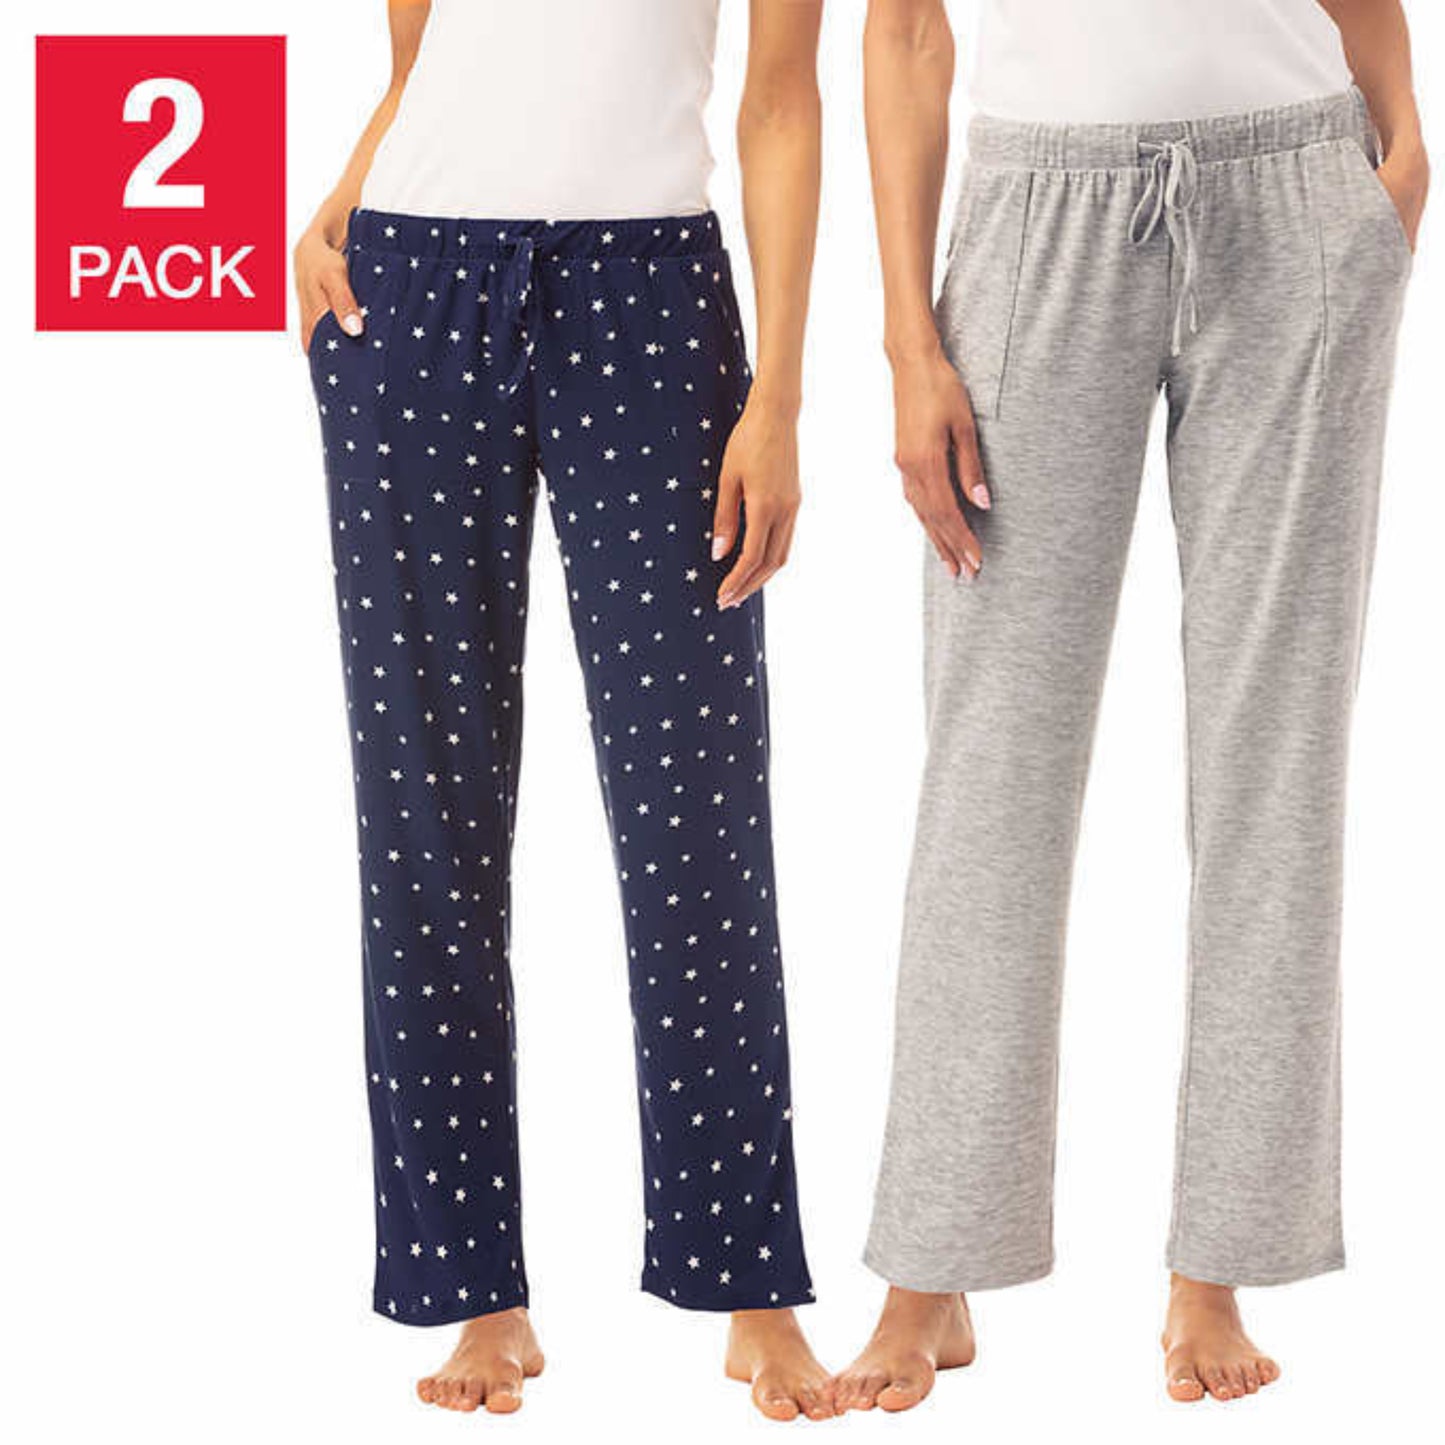 Lucky Brand Ultra Soft Jersey Relaxed Fit 2-pack Lounge Pajama Pants